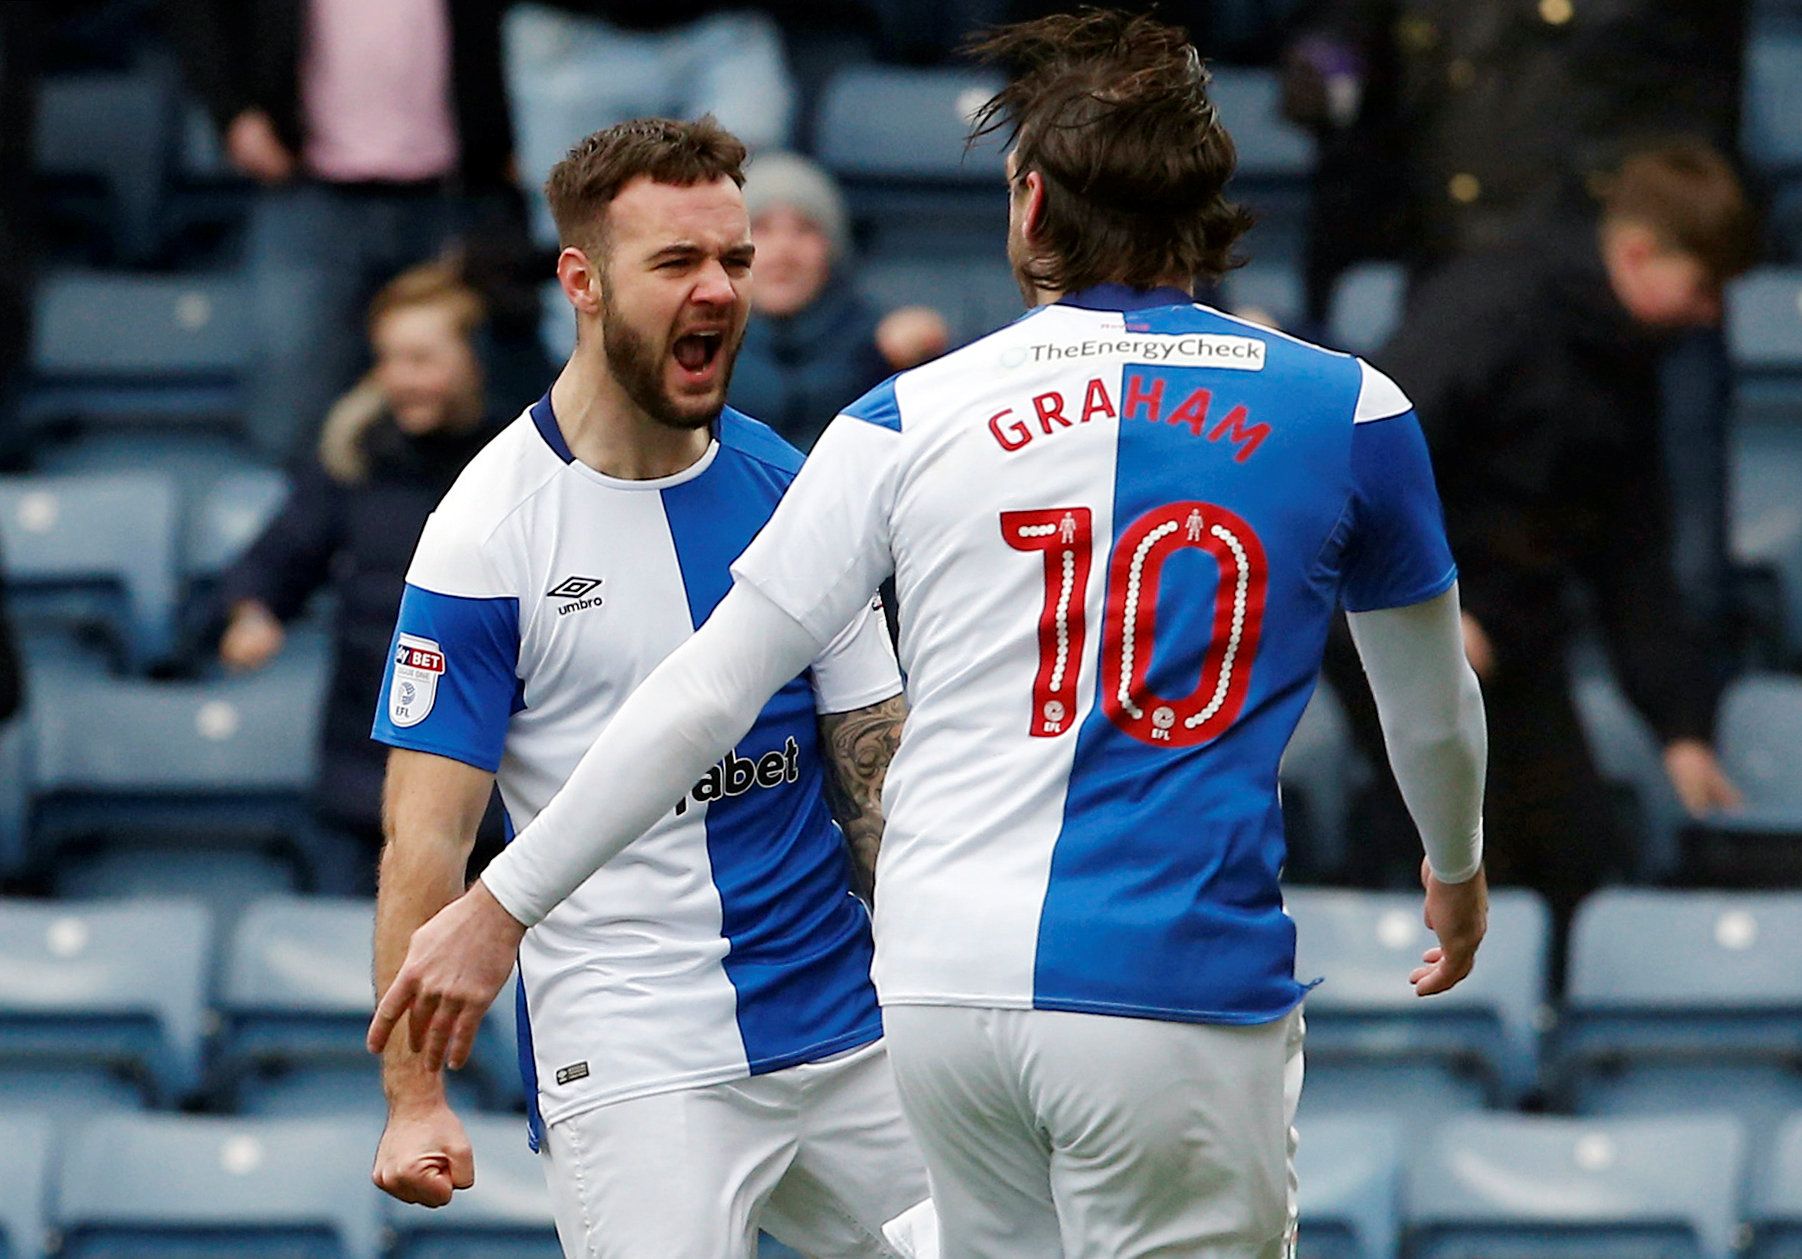 Soccer Football - League One - Blackburn Rovers vs Wigan Athletic - Ewood Park, Blackburn, Britain - March 4, 2018   Blackburn Rovers' Adam Armstrong celebrates after he scored his sides first goal   Action Images/Craig Brough    EDITORIAL USE ONLY. No use with unauthorized audio, video, data, fixture lists, club/league logos or 